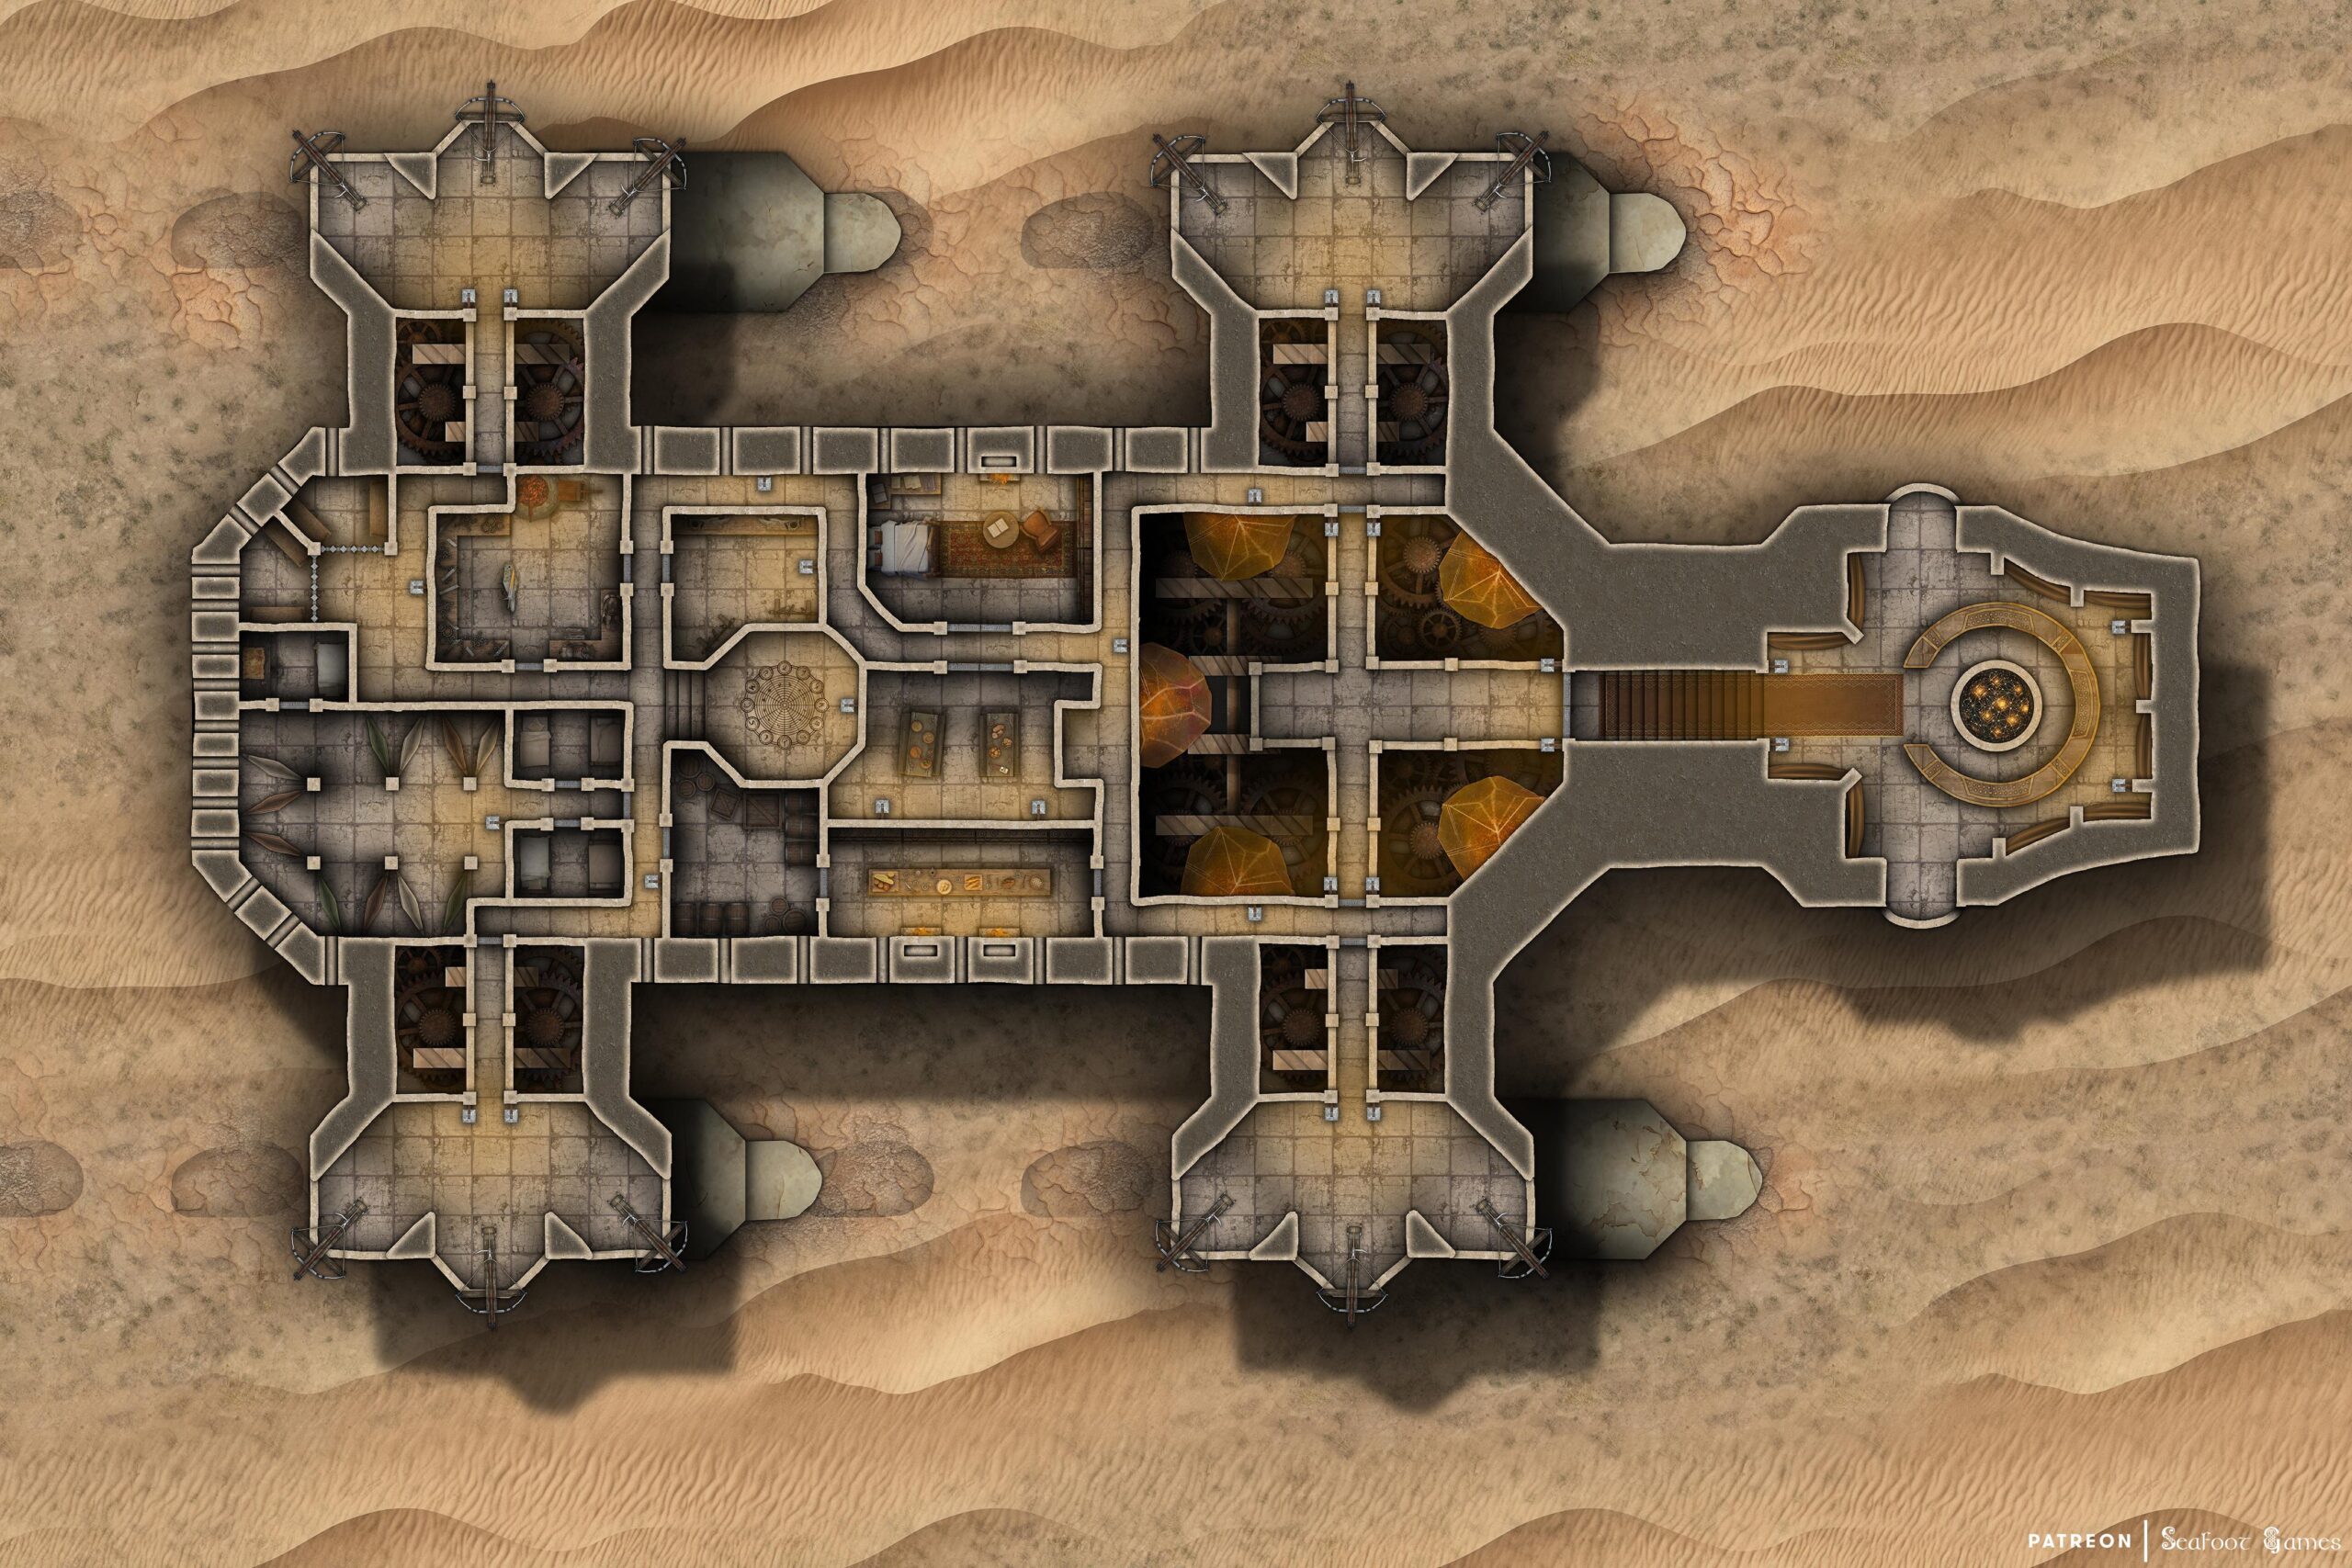 Desert Camel Walking Stronghold Free 60x40 Battlemap, which was inspired by a Star Wars ATAT and the Camel Divine Beast from Zelda: BotW. VTT ready!